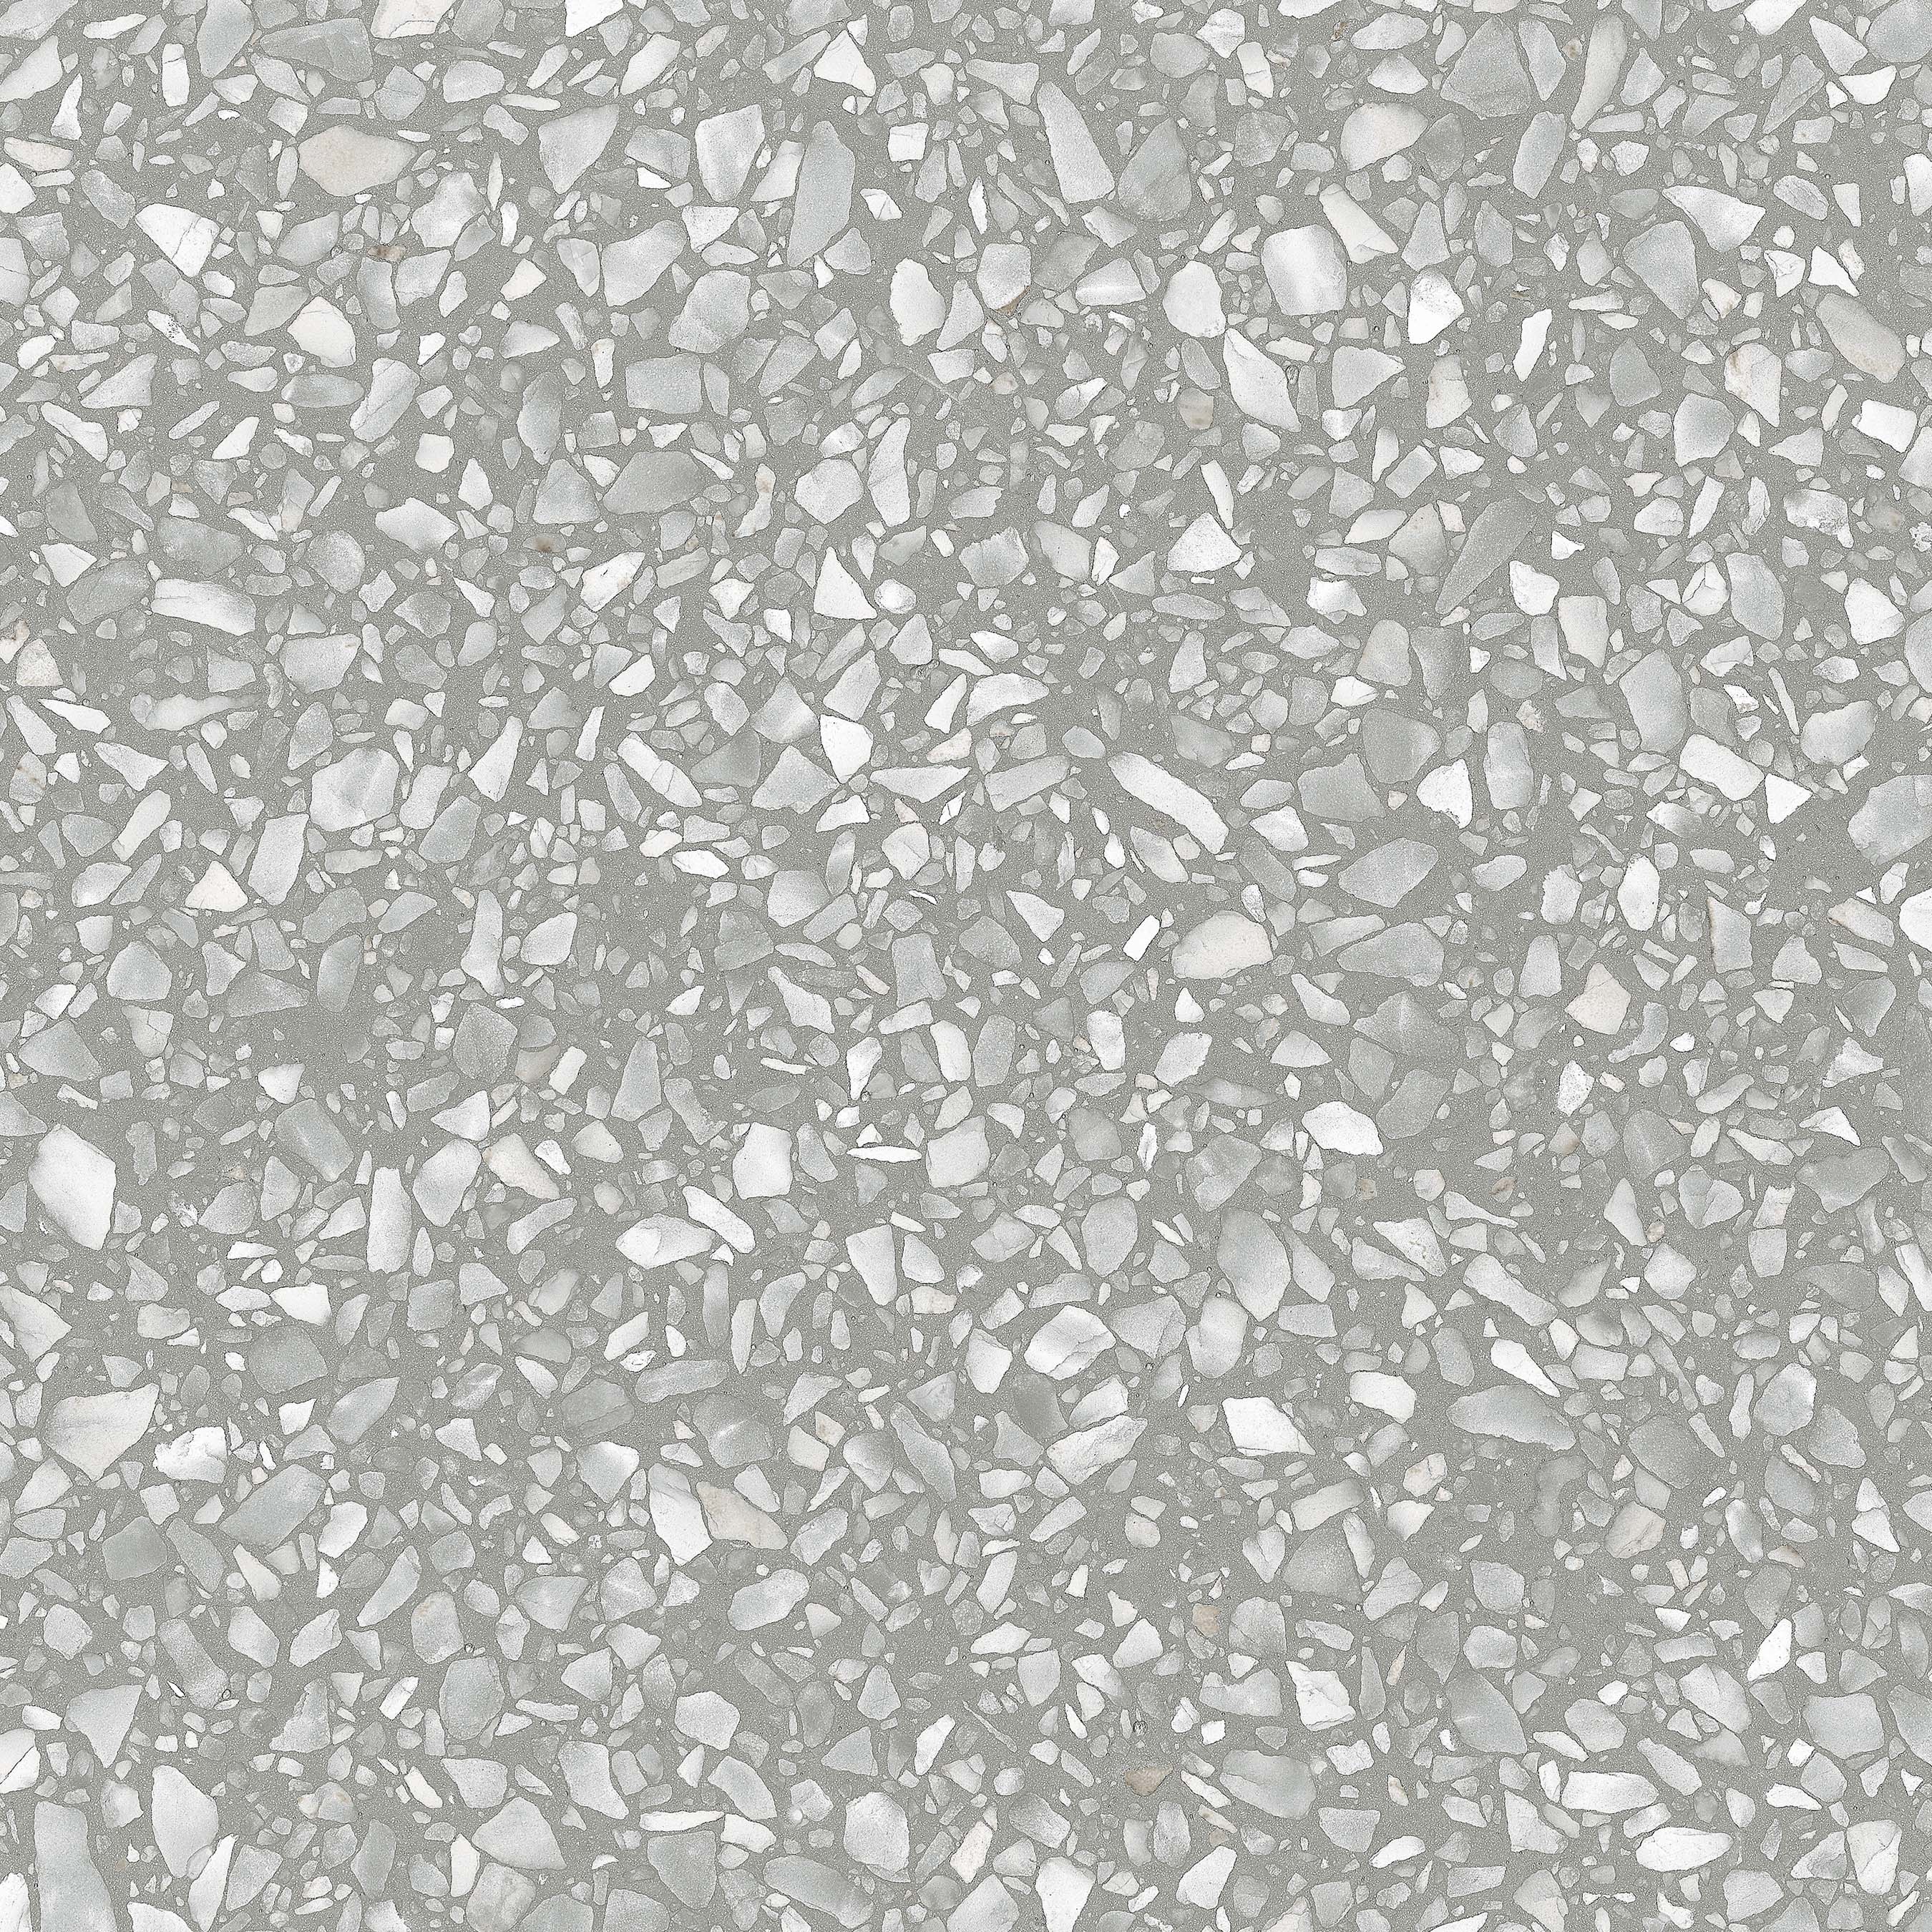 landmark frontier20 terrazzo fashion grey paver tile 24x24x20mm matte rectified porcelain tile distributed by surface group international